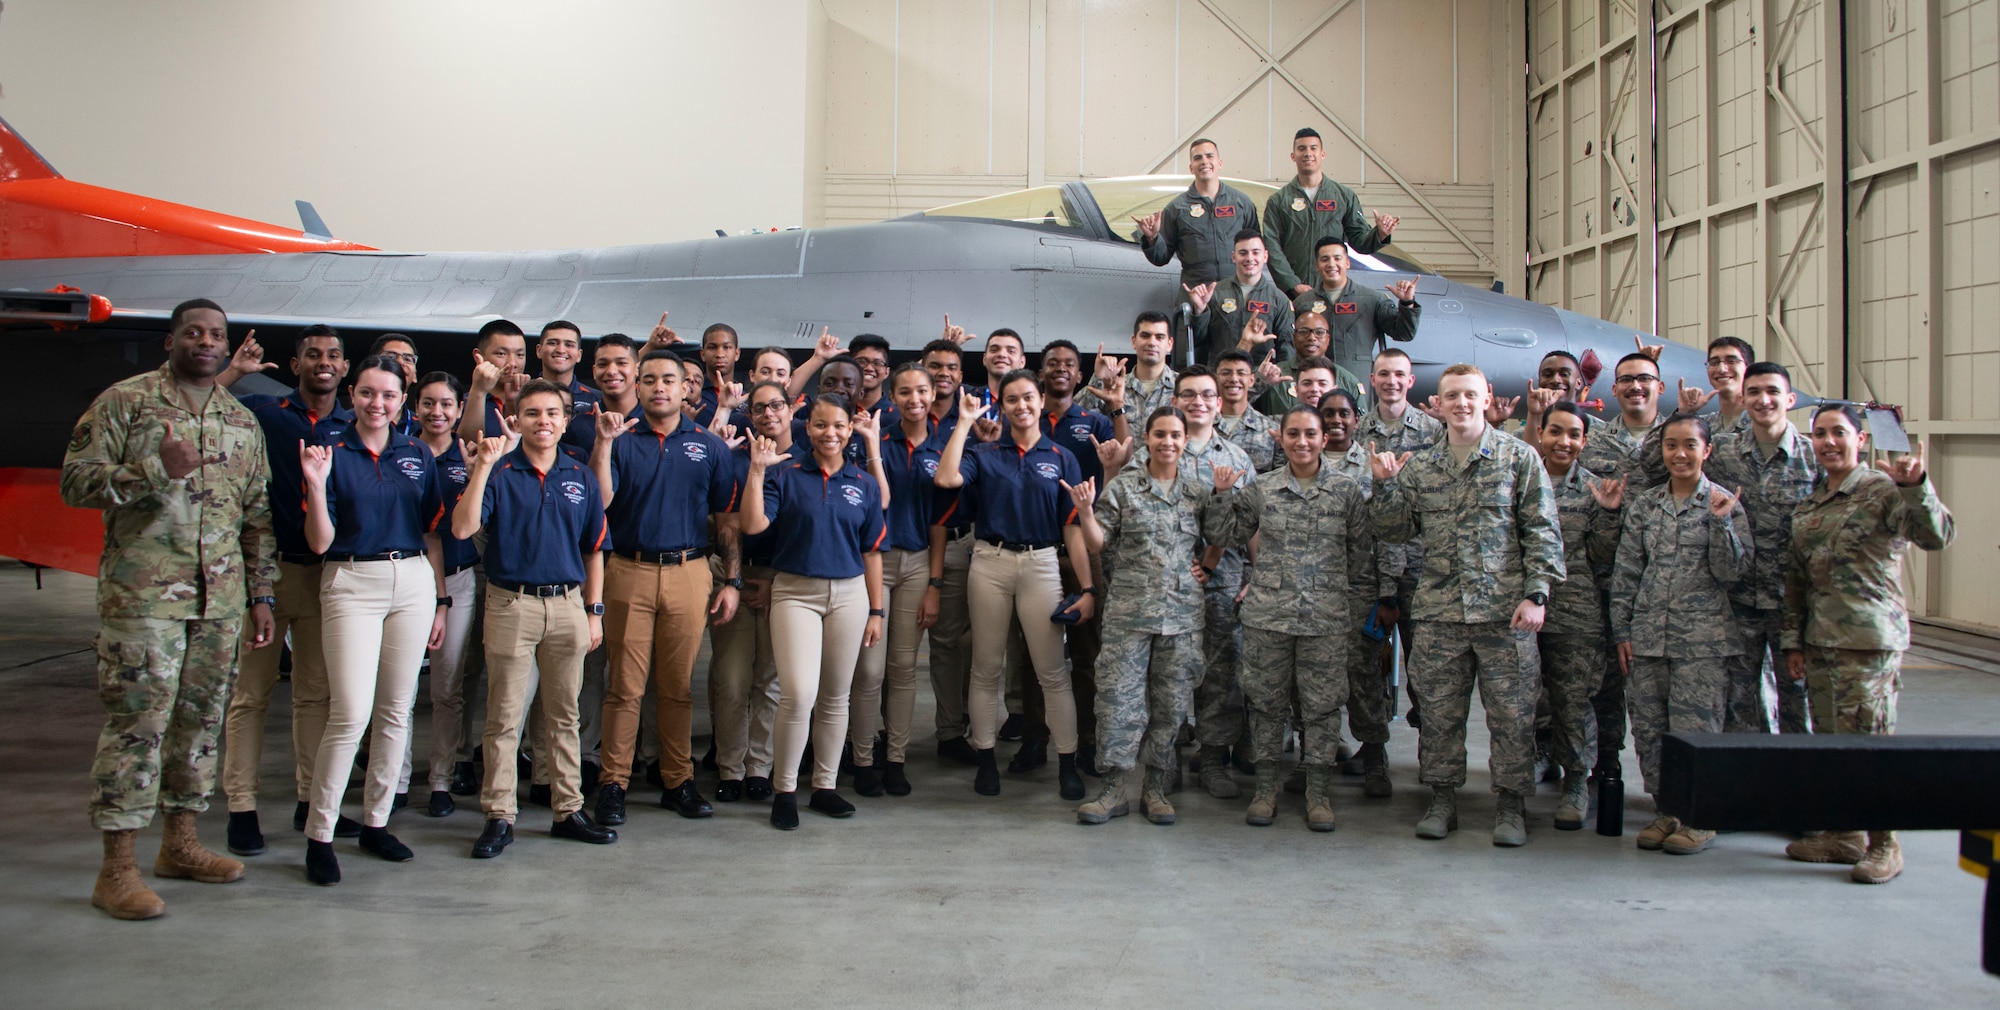 Air Force Reserve Officer Training Corps cadets pose for a photo at Tyndall Air Force Base, Florida, Jan. 15, 2020. The cadets toured several units on base including the 53rd Weapons Evaluation Group. (U.S. Air Force photo by 2nd Lt. Kayla Fitzgerald)